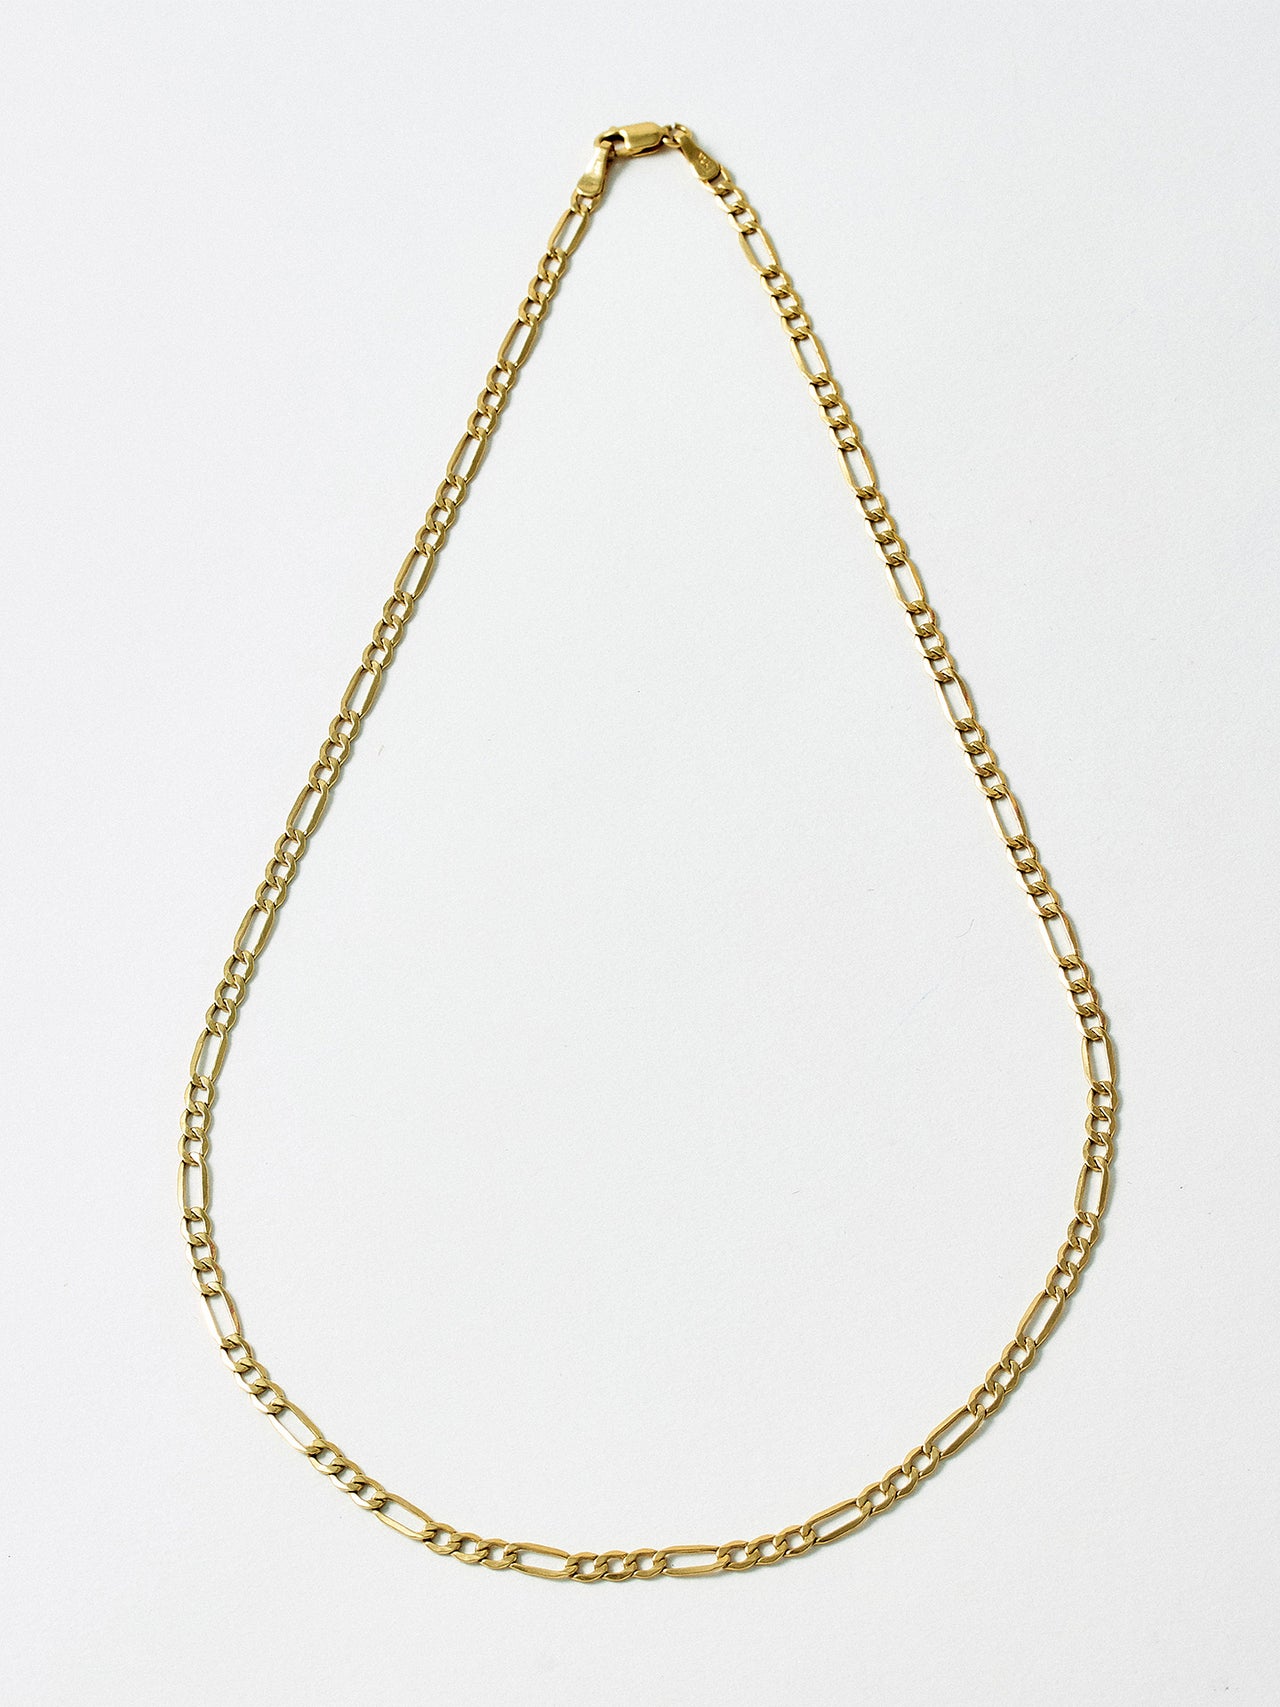 14kt Yellow Gold Hollow Figaro Chain pictured on light grey background.